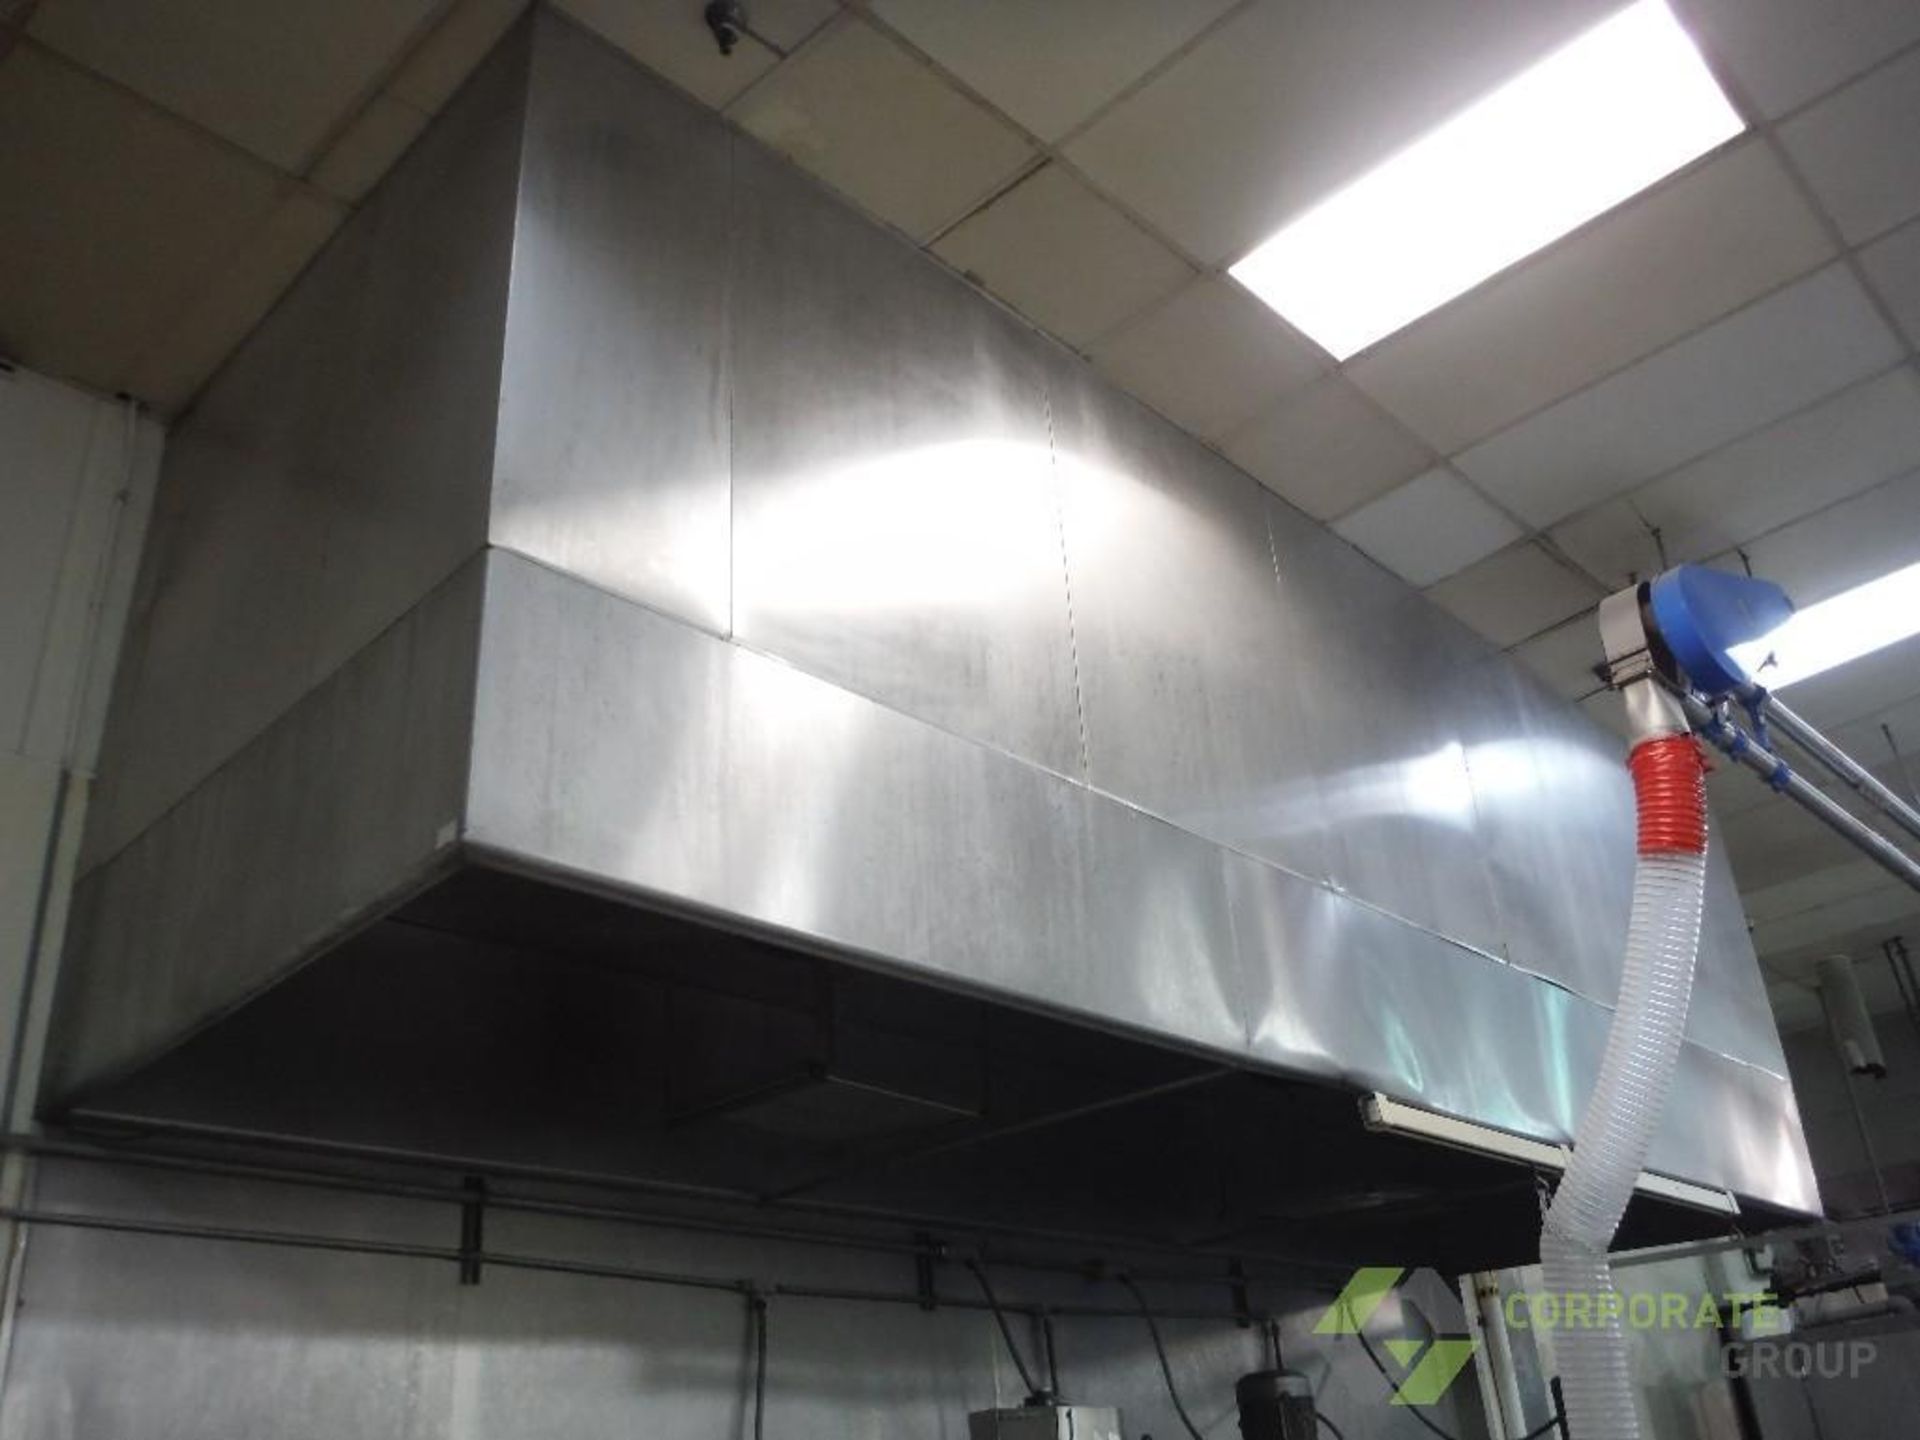 SS overhead hood, 22 ft. long x 6 ft. wide x 6 ft. tall, 2 vents, sprinkler spickets